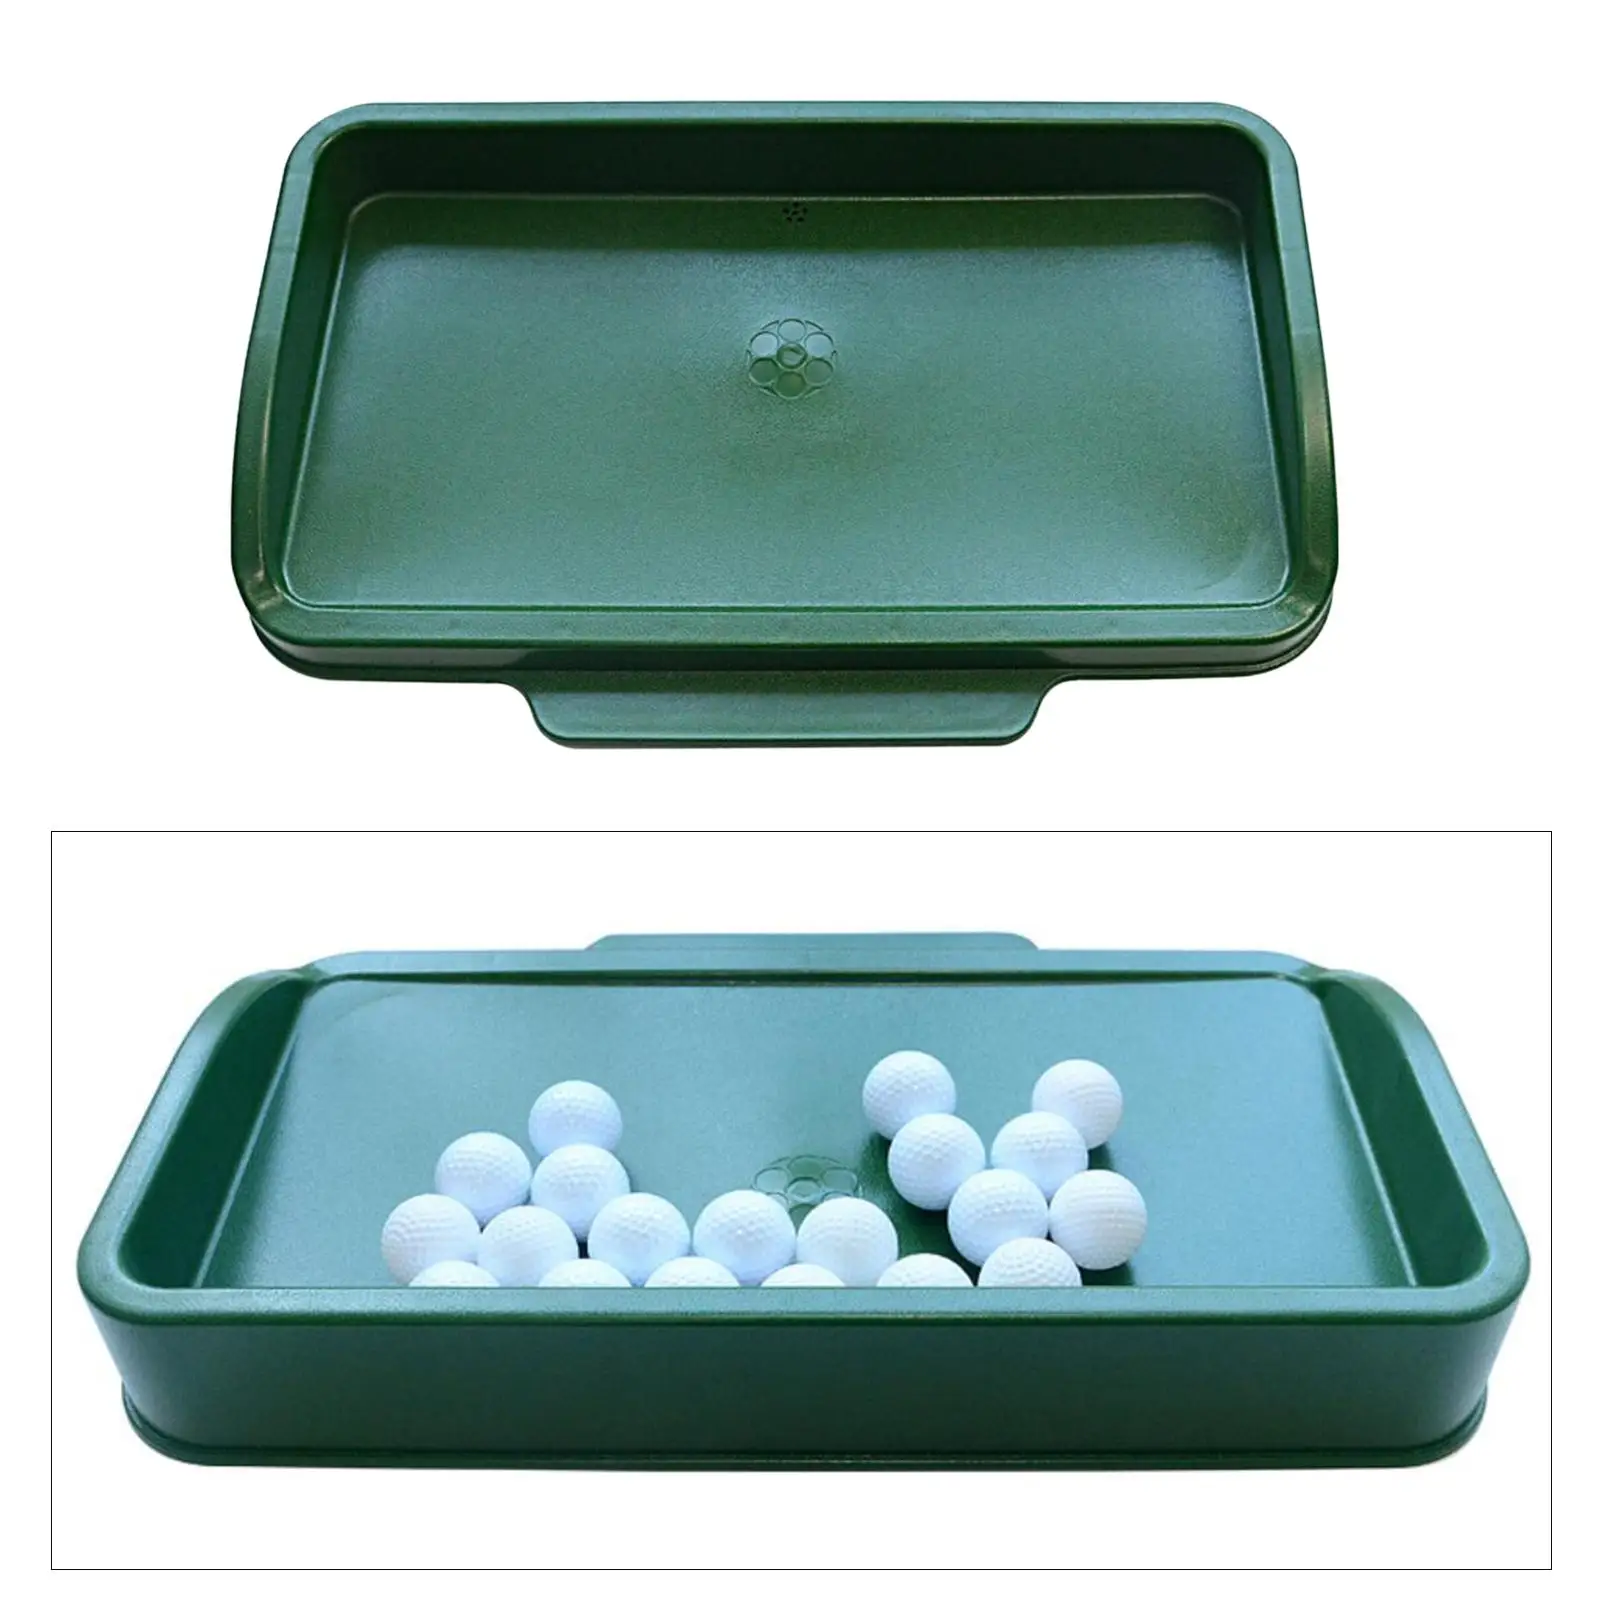 Golf Ball Tray Driving Range Golf Balls Storage Container Driving Range Golf Balls Organizer Box for Practice Golf Accessories